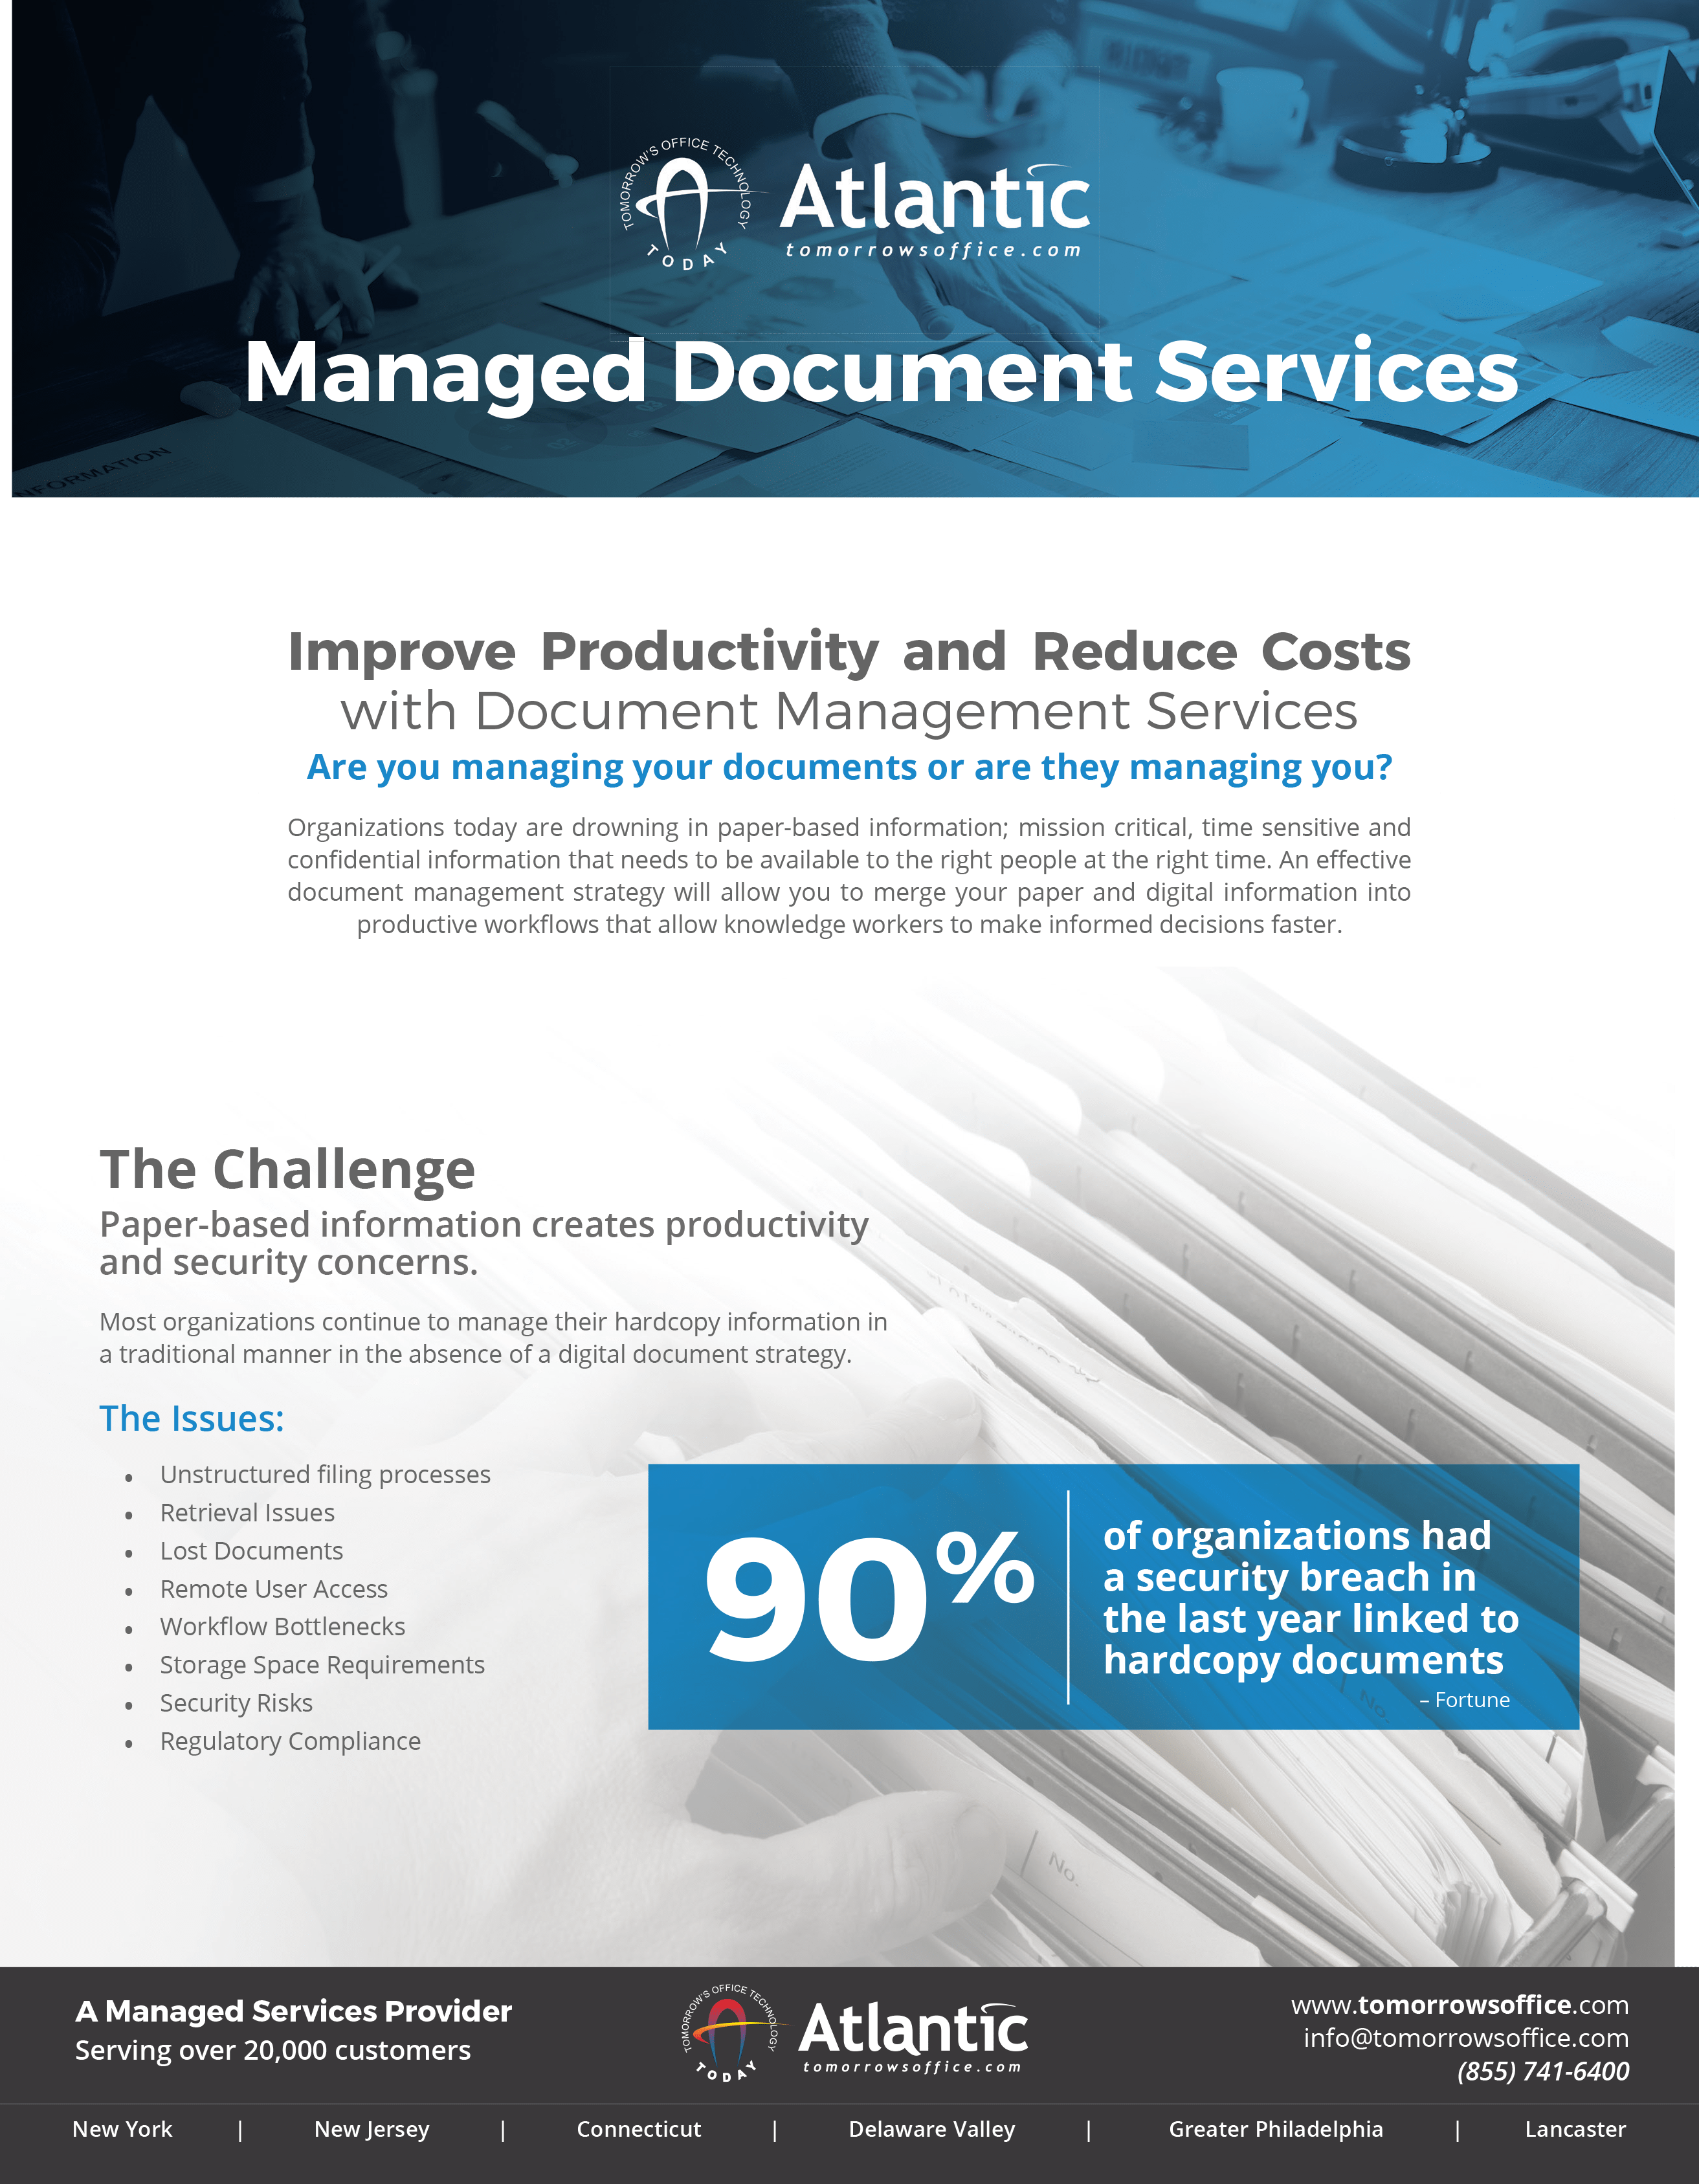 Atlantic Managed Document Services with text. Improve productivity and reduce costs.